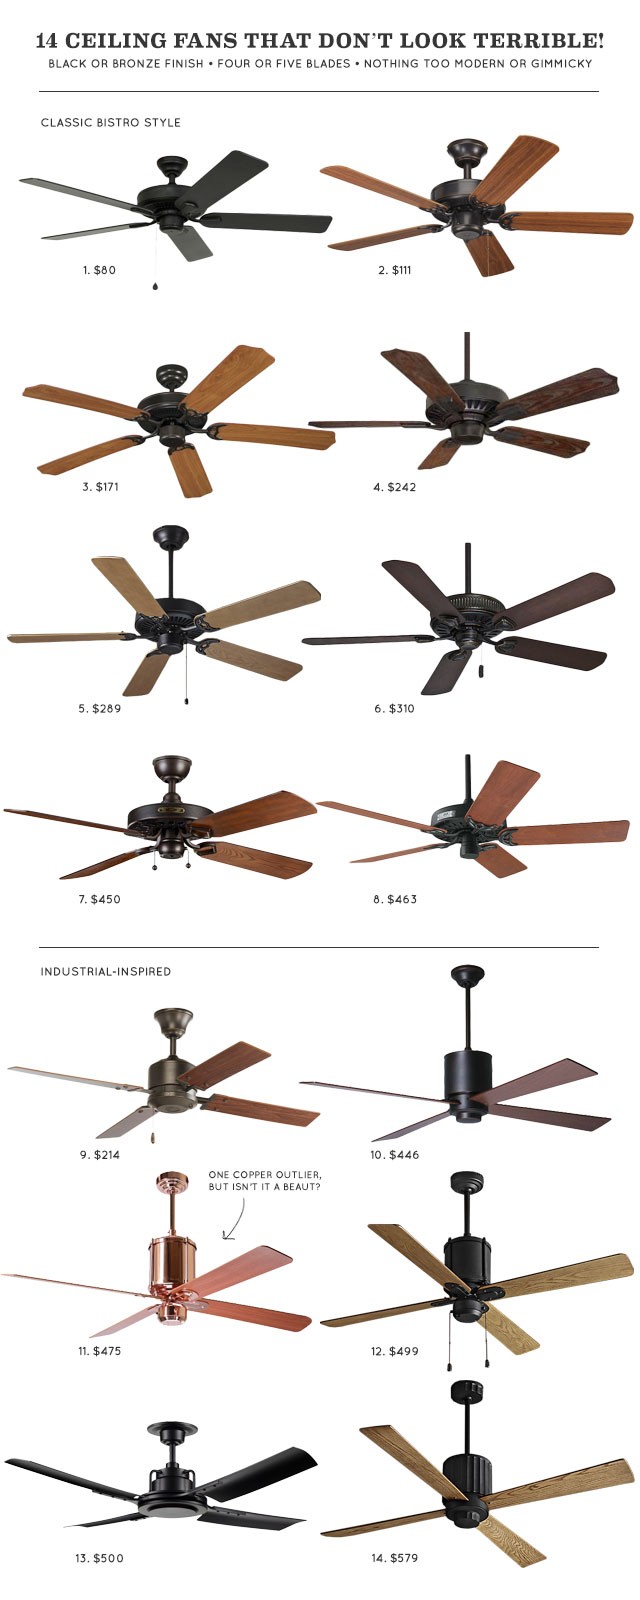 14 Ceiling Fans that Don't Look Terrible! | Making it Lovely